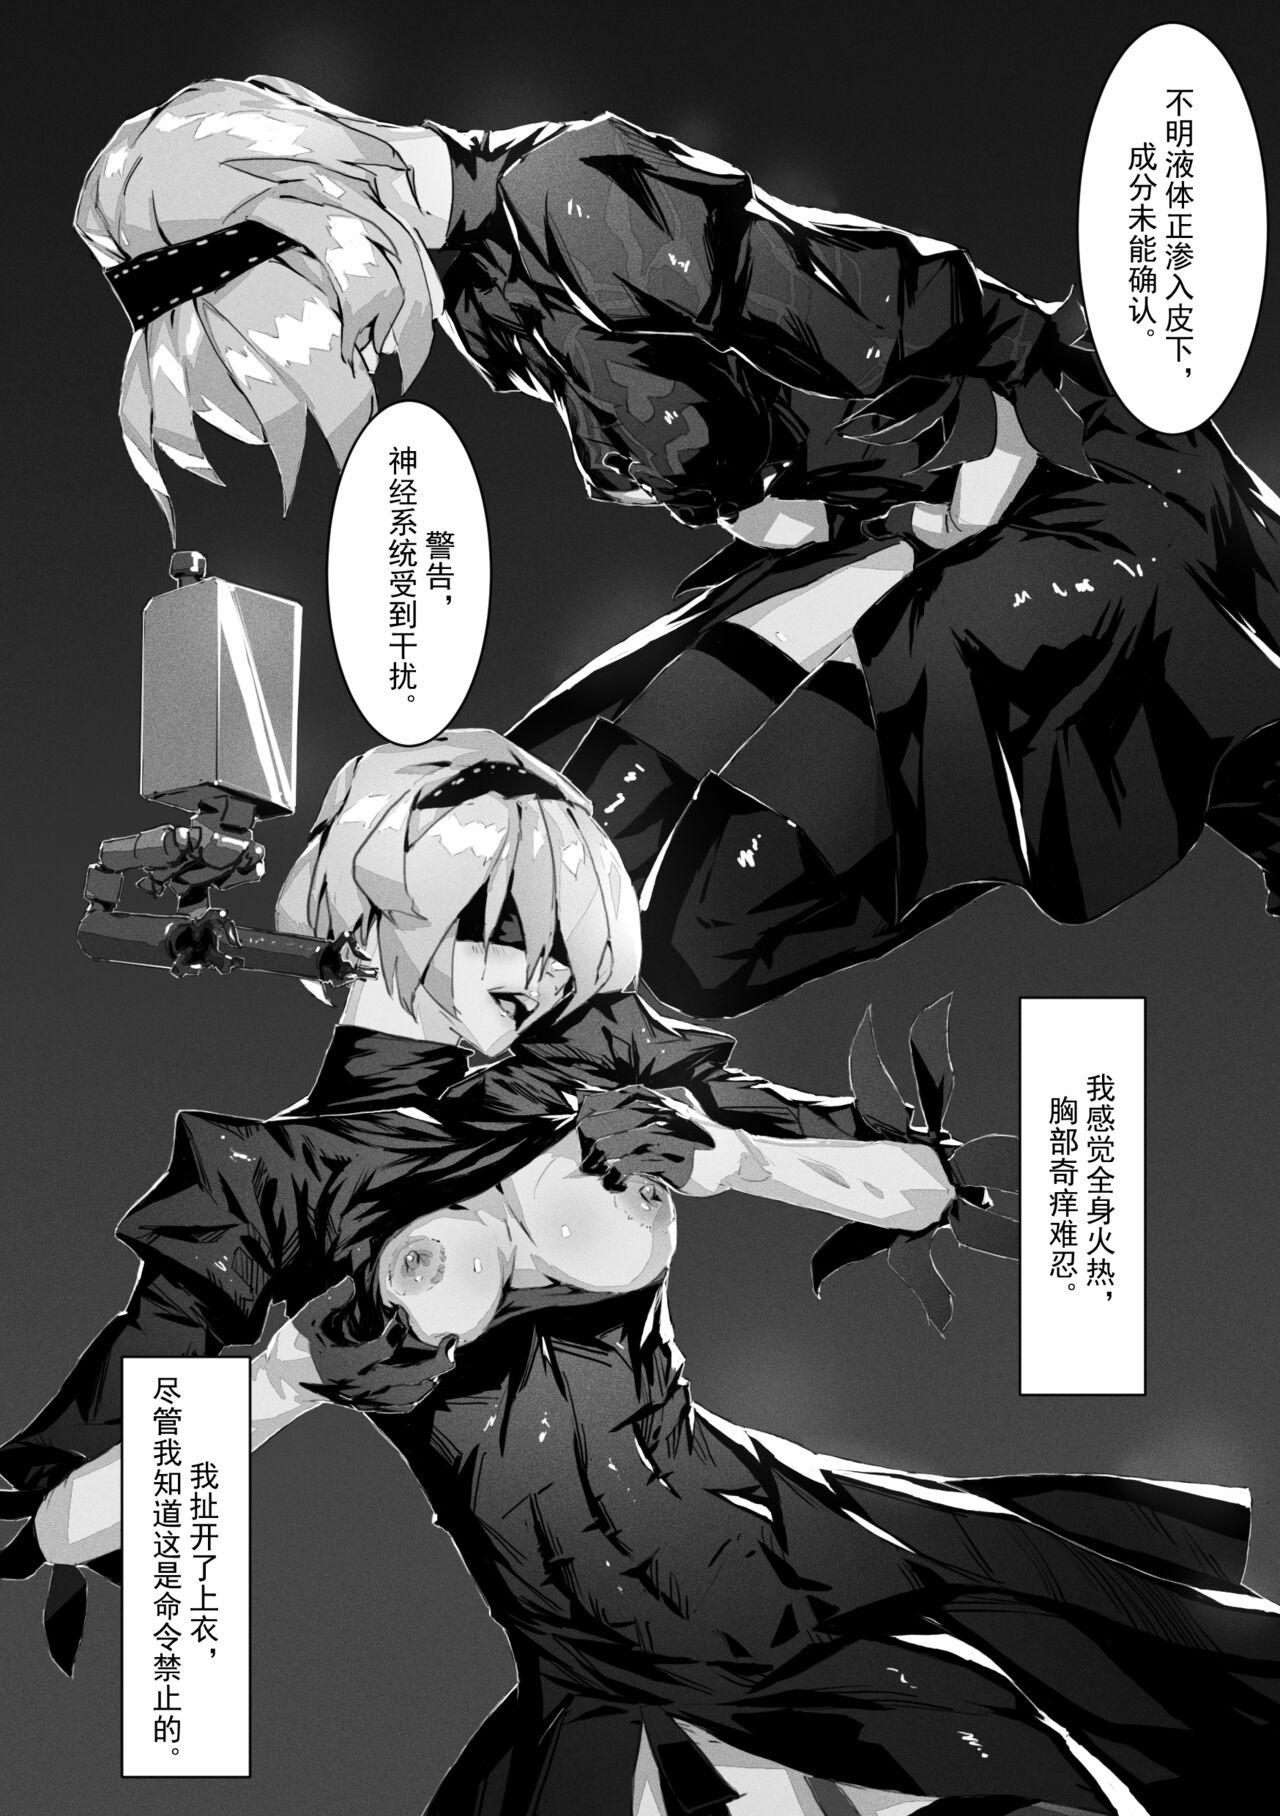 2B In Trouble Part 1-6 7